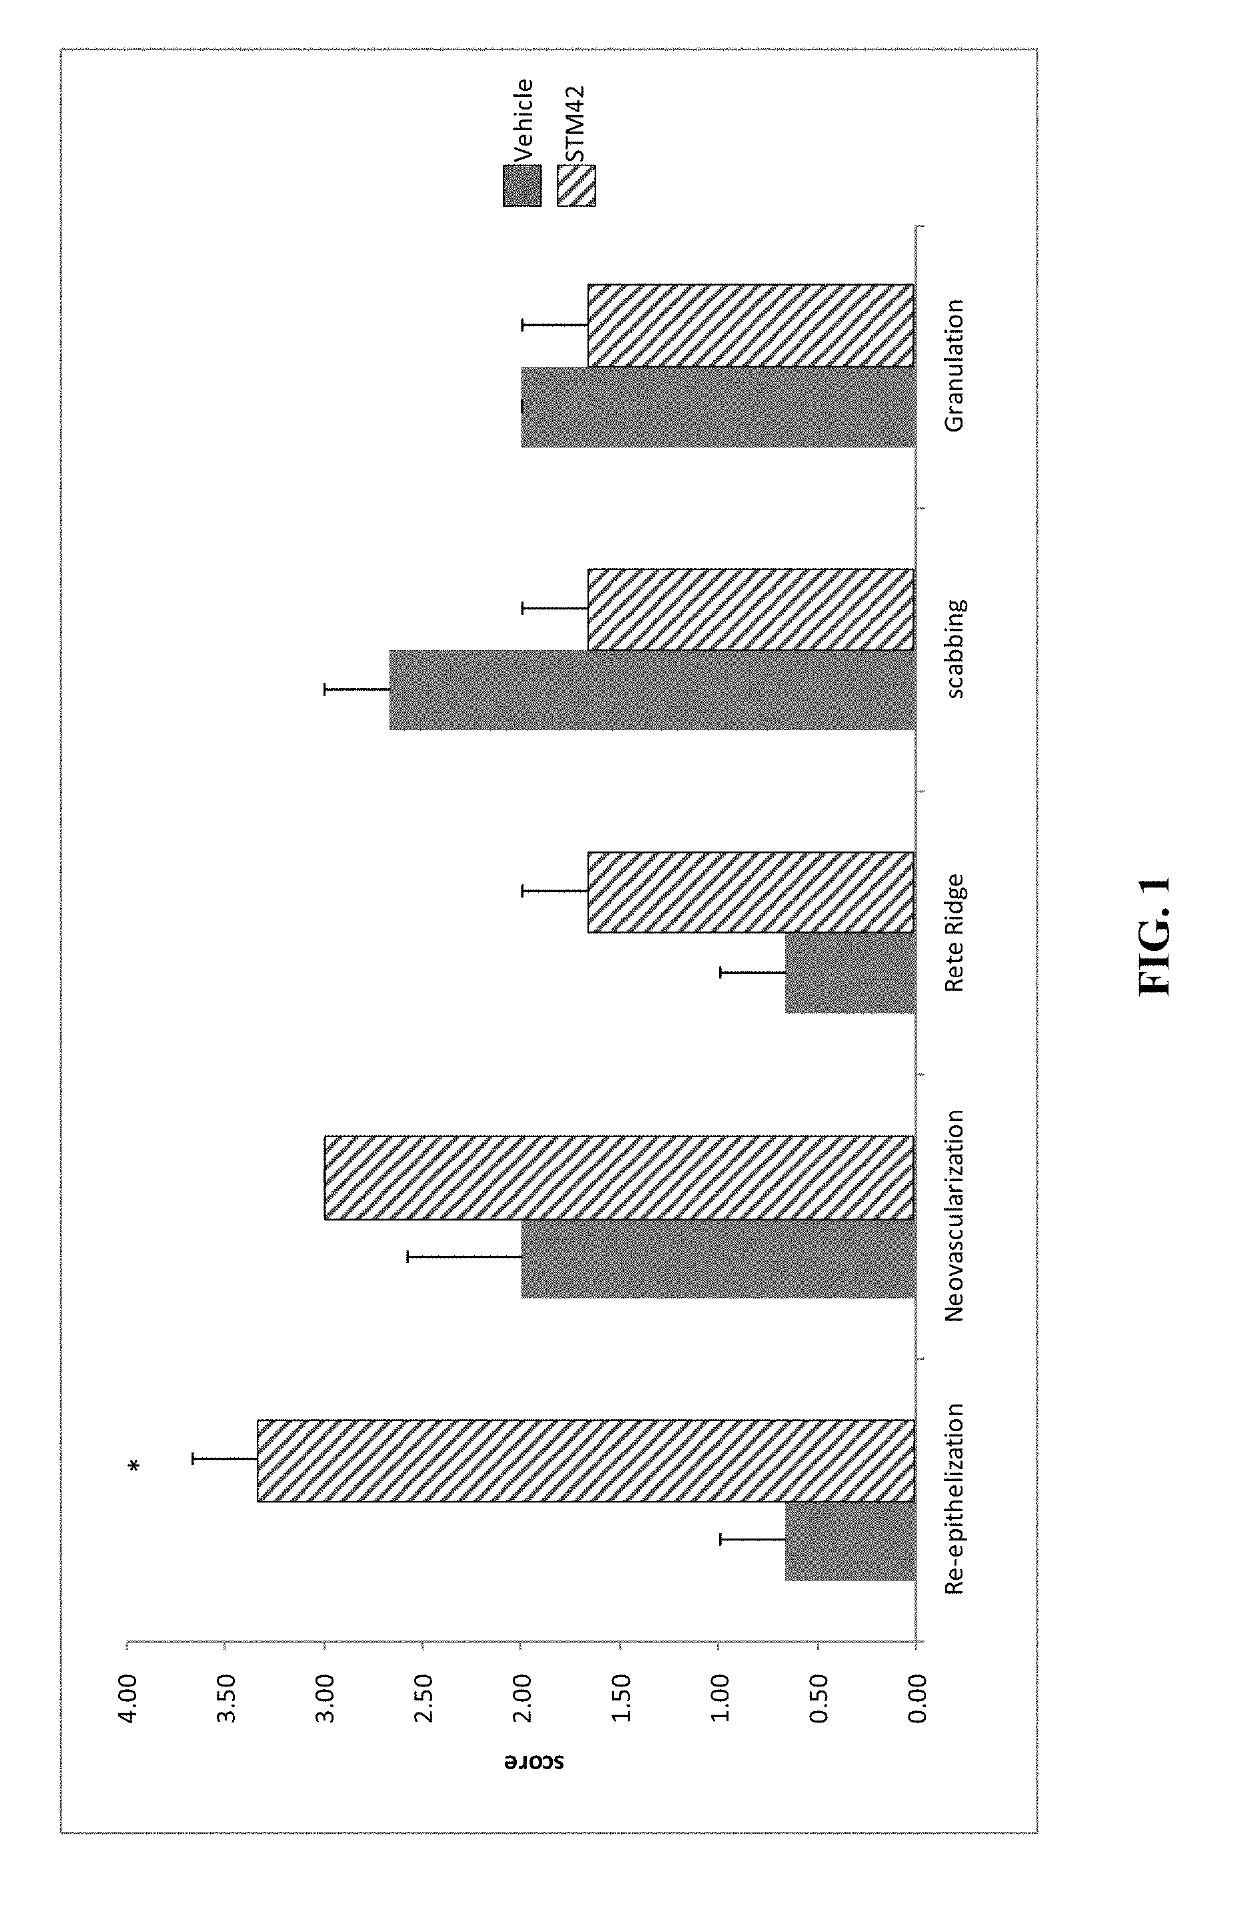 Compositions and Methods for Wound Treatment